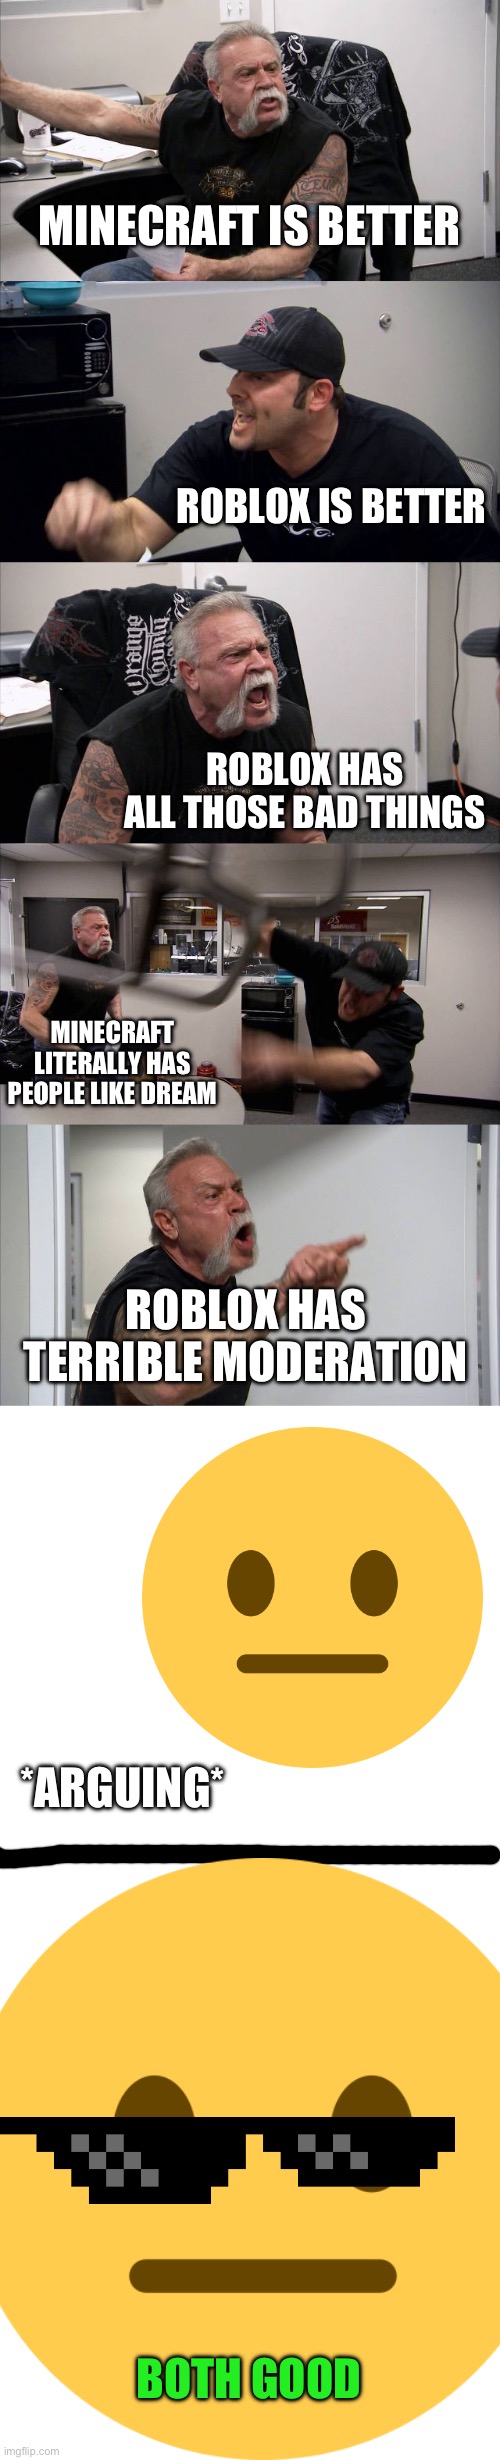 Both good(also it’s in gaming cuz 2 different games mentioned in meme) | MINECRAFT IS BETTER; ROBLOX IS BETTER; ROBLOX HAS ALL THOSE BAD THINGS; MINECRAFT LITERALLY HAS PEOPLE LIKE DREAM; ROBLOX HAS TERRIBLE MODERATION; *ARGUING*; BOTH GOOD | image tagged in memes,american chopper argument,gaming,minecraft,roblox | made w/ Imgflip meme maker